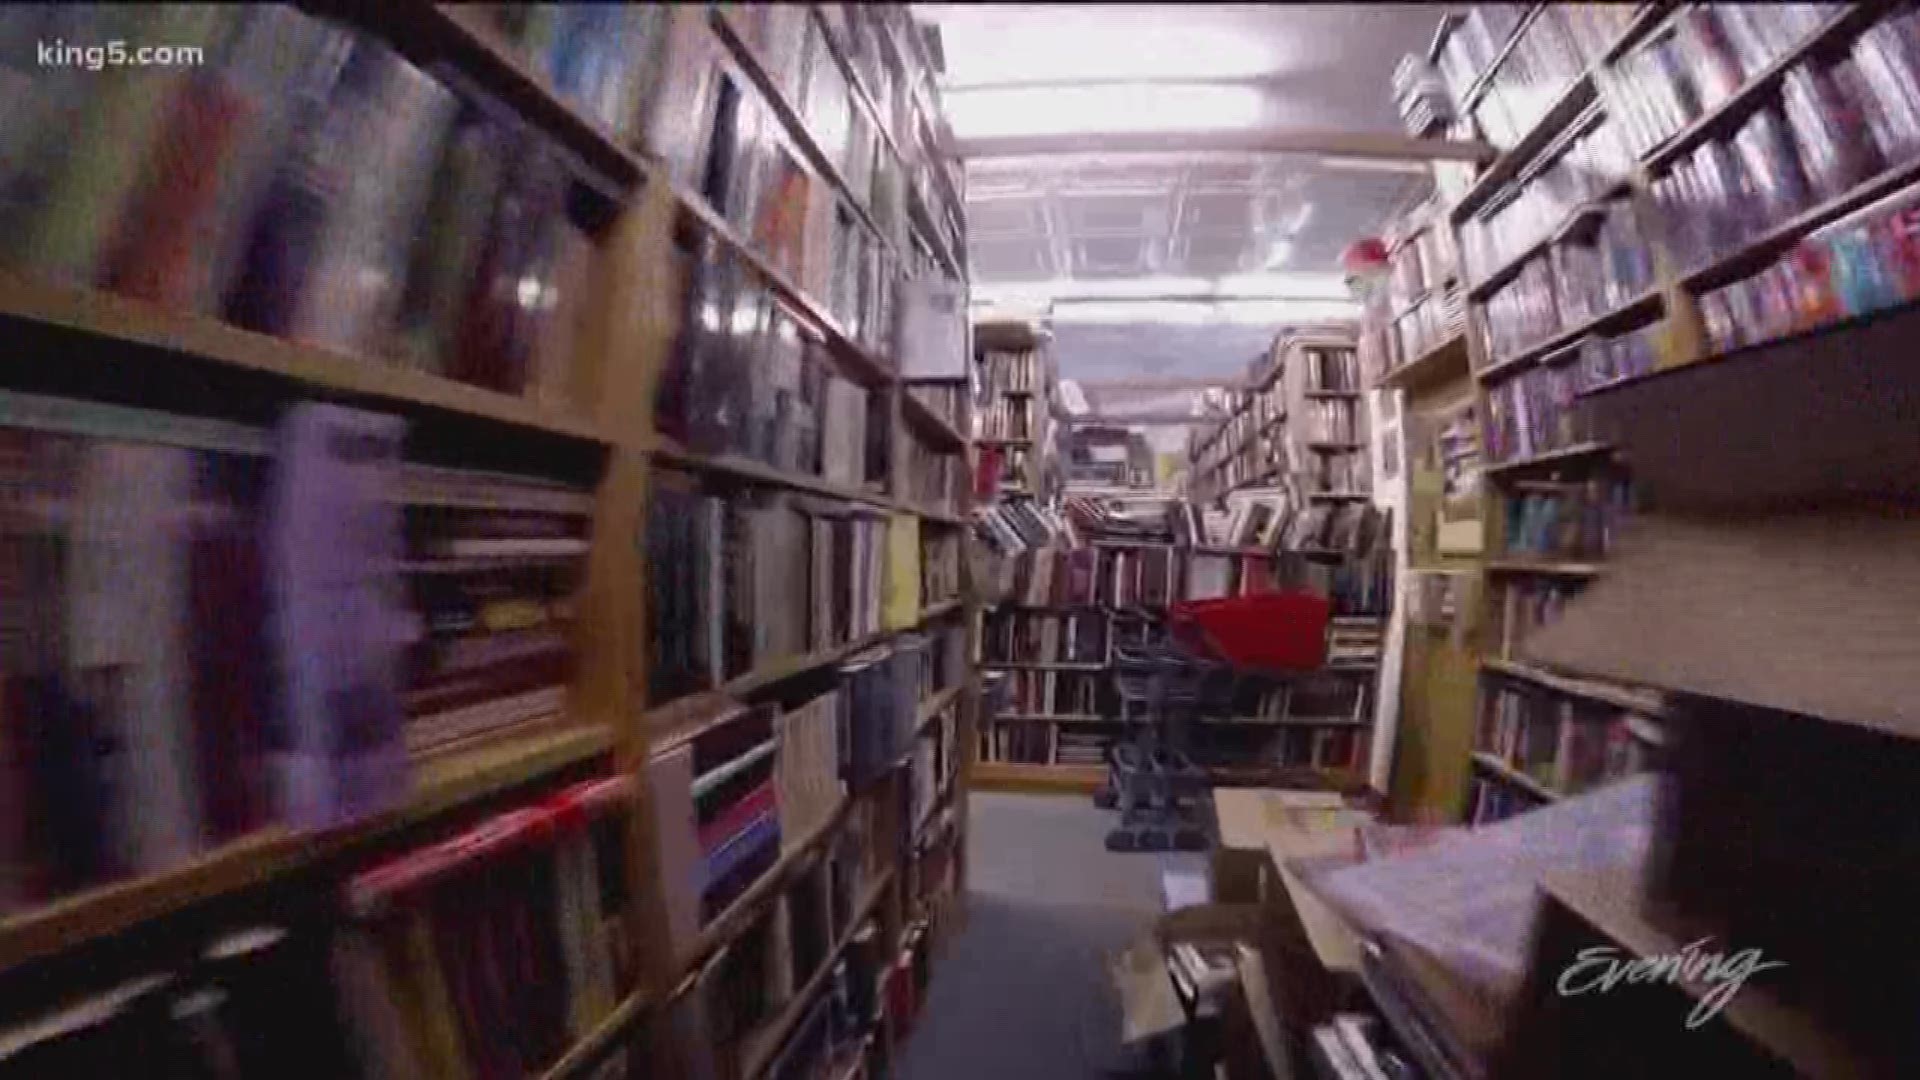 Tacoma Book Center has half a million books for sale on its crowded shelves.